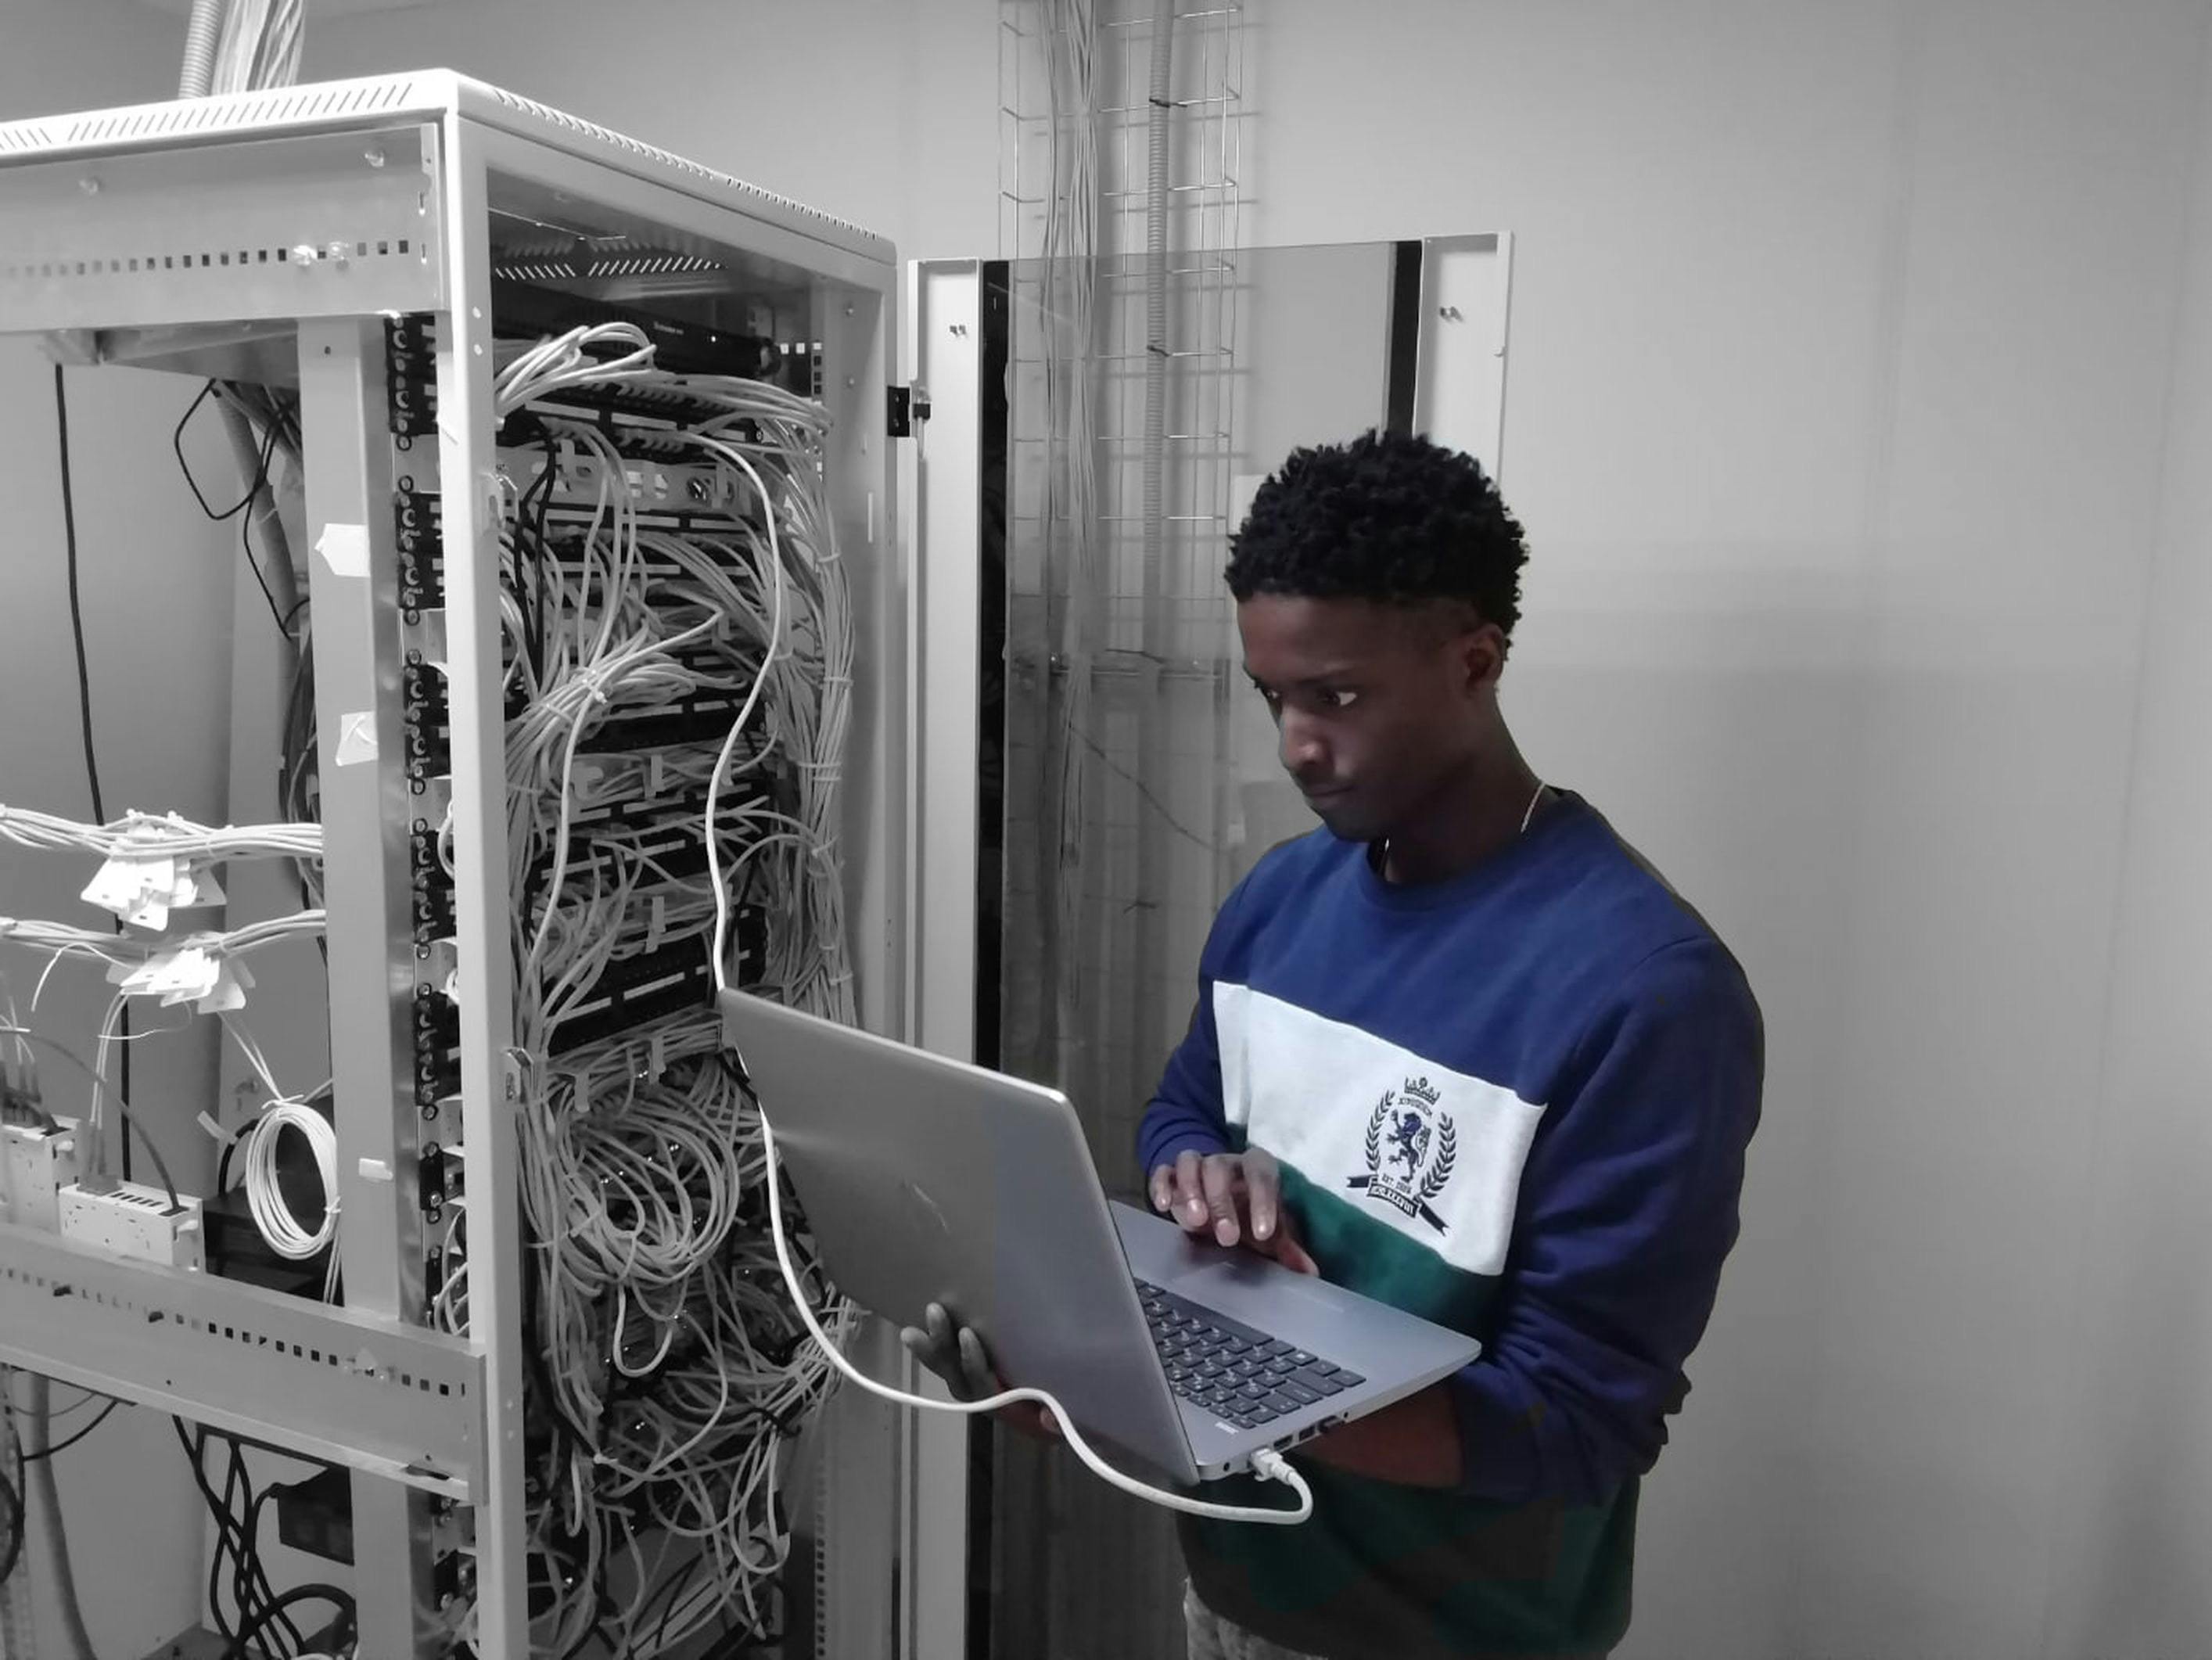 IT technician reads from a laptop connected to a server by a data cable